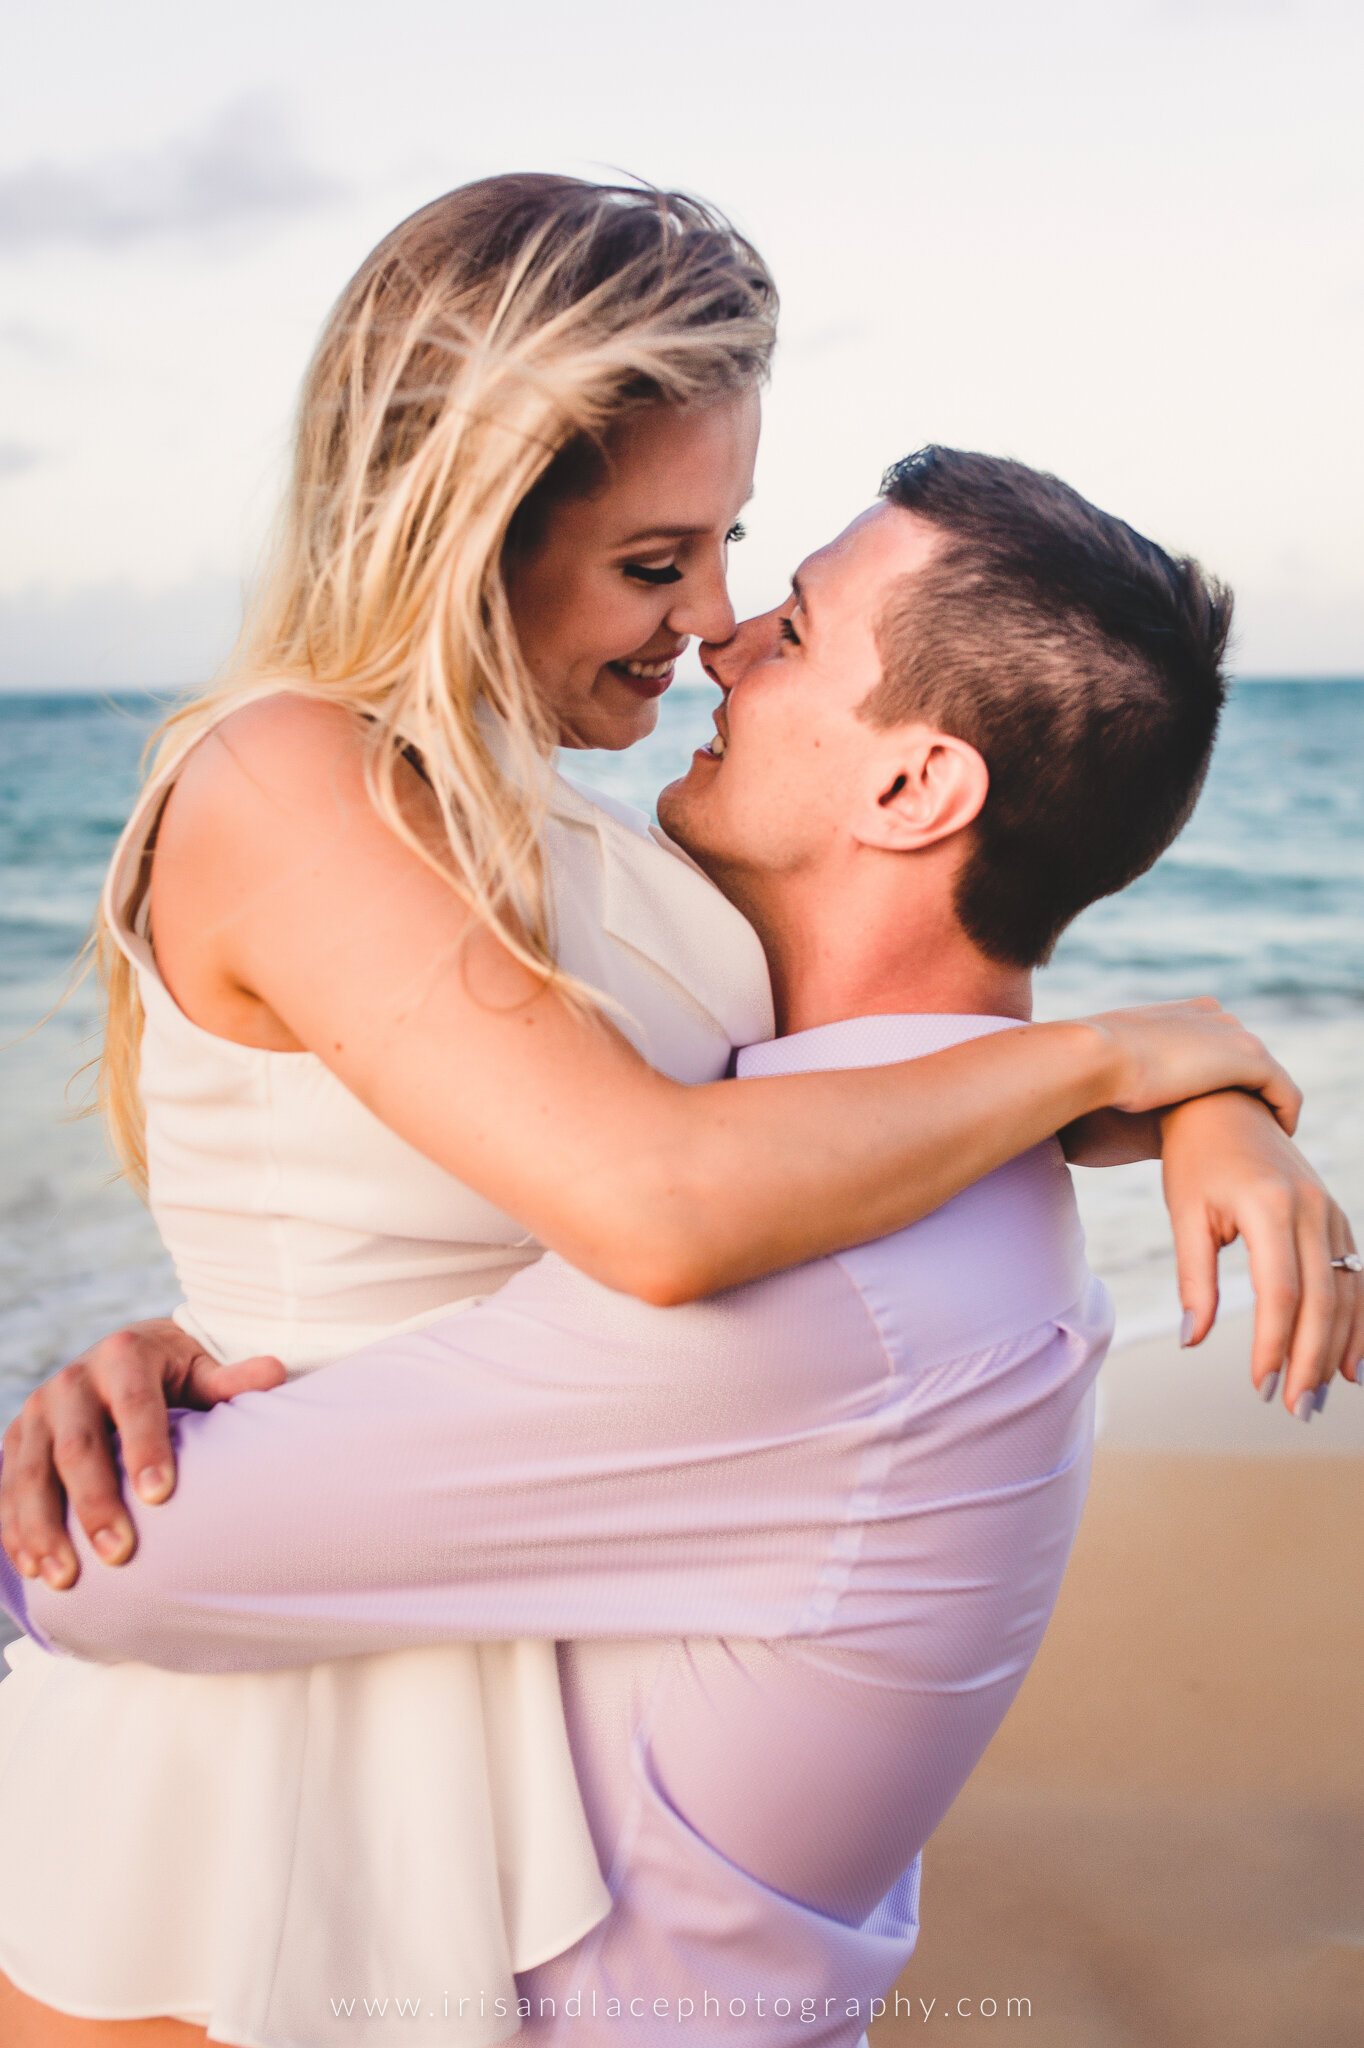 Engagement Pictures in Northern California on the Beach  |  Iris and Lace Photography 